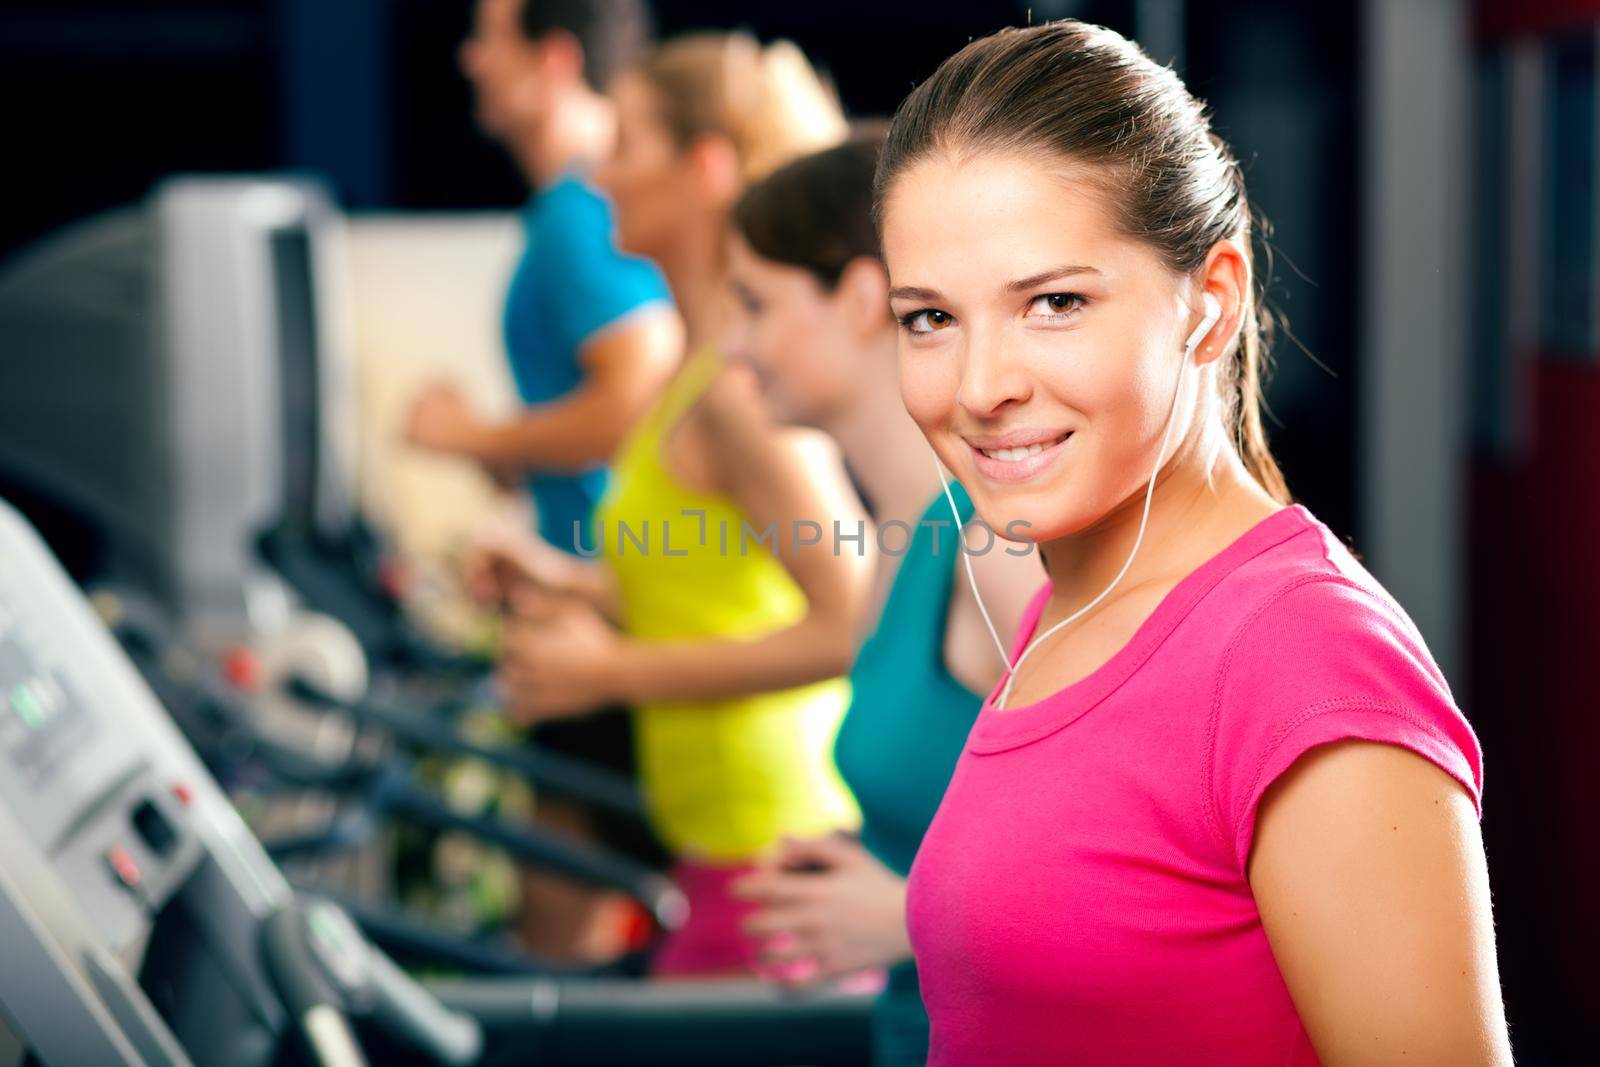 Running on treadmill in gym - group of women and men exercising to gain more fitness